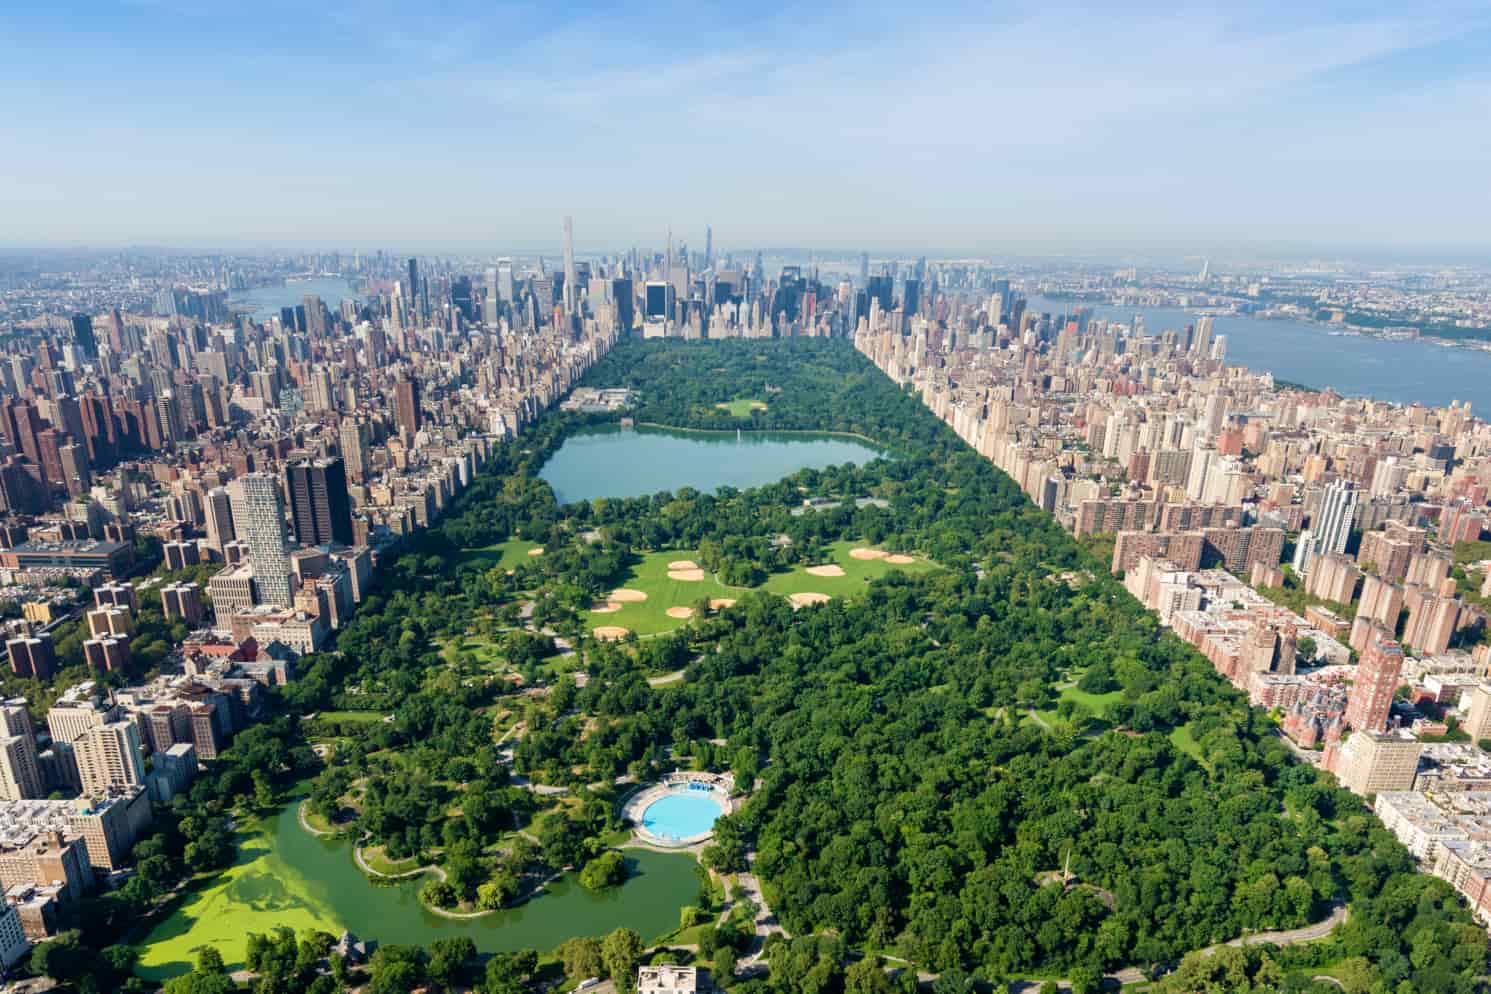 Aerial view of Central Park surrounded by the high-rise buildings of Manhattan, New York City